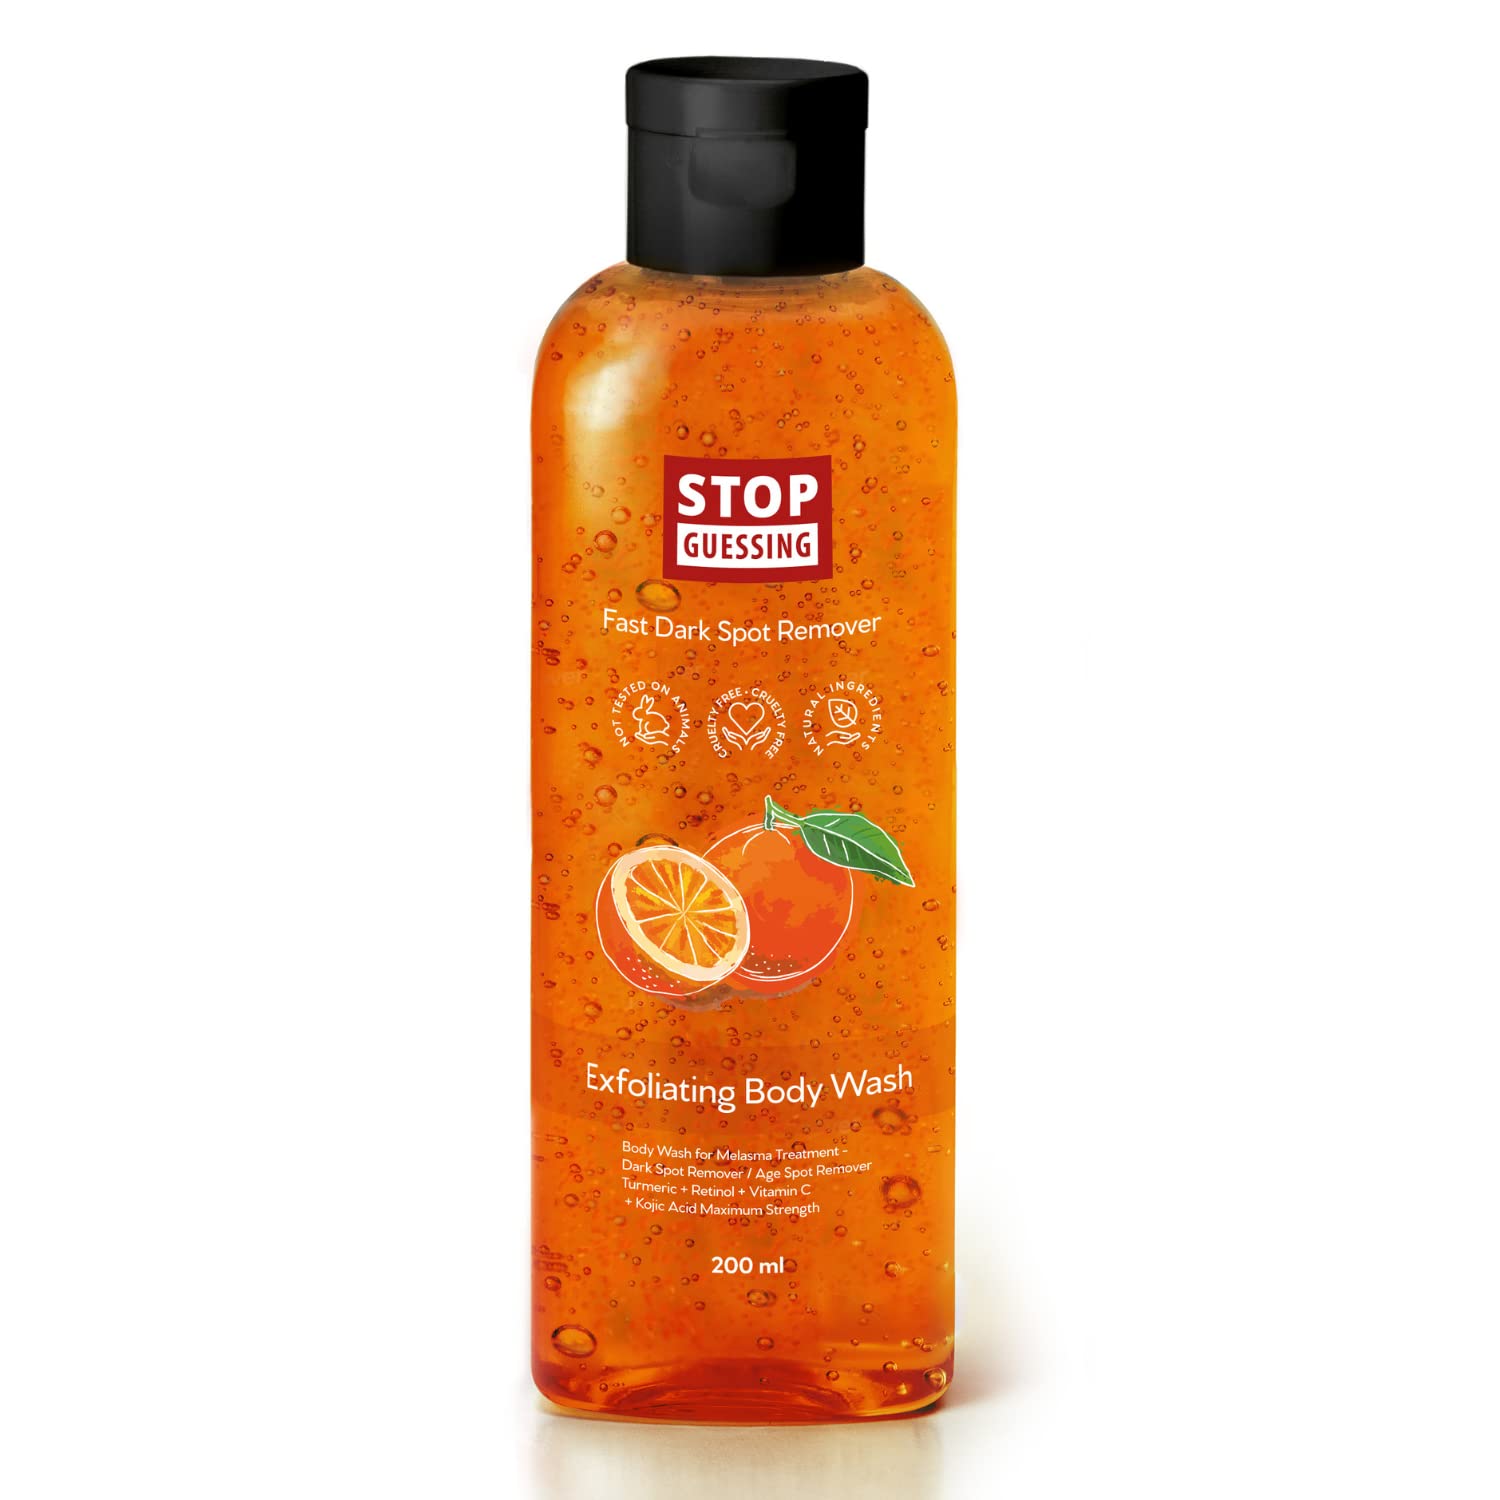 Body Wash for Blotches, Dark Spot Removal/Color Correction, Safe Home Treatment, Maximum Strength